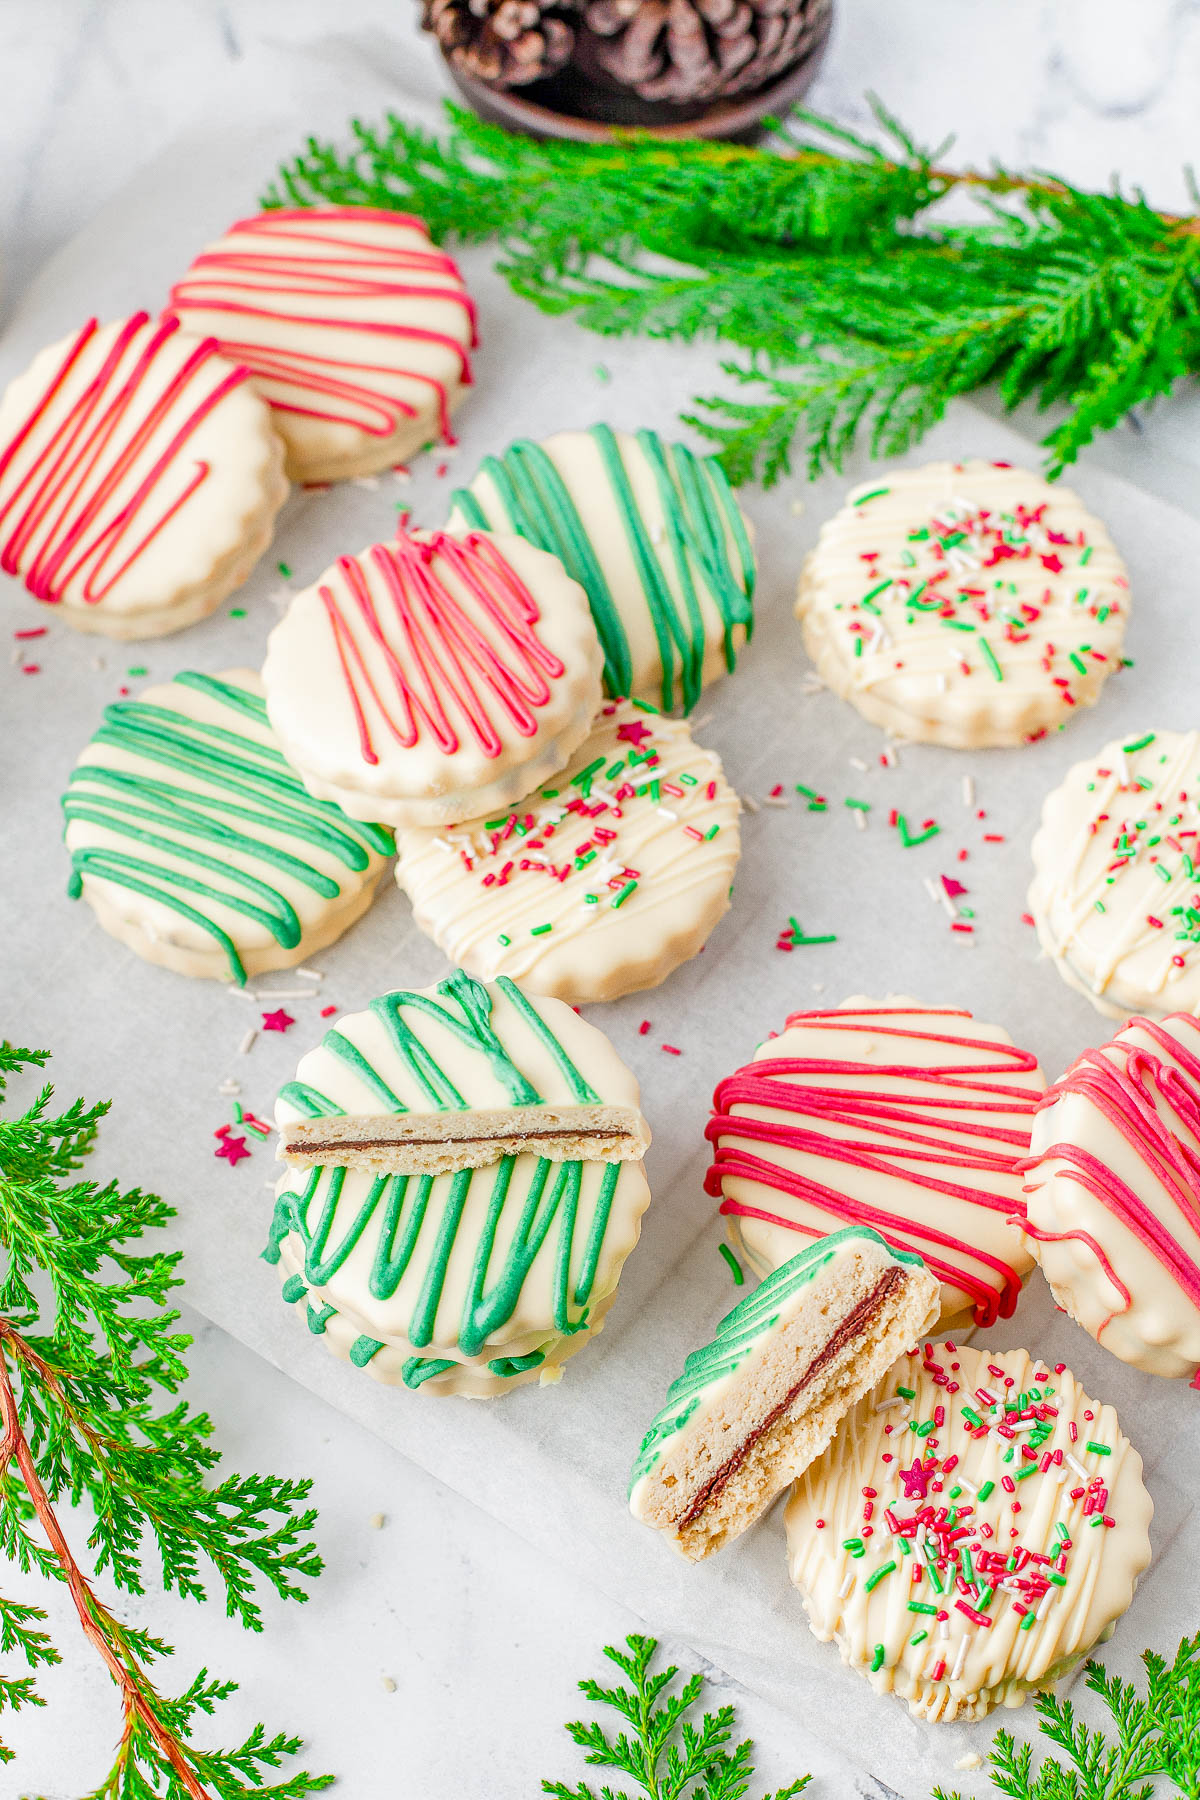 Shortbread Sandwich Cookies - Chocolate filling is sandwiched between two buttery shortbread cookies before the cookies are dipped in sweet white chocolate and festively decorated! EASY enough for novice bakers and PERFECT for holiday entertaining, gifting, and cookie exchanges! 